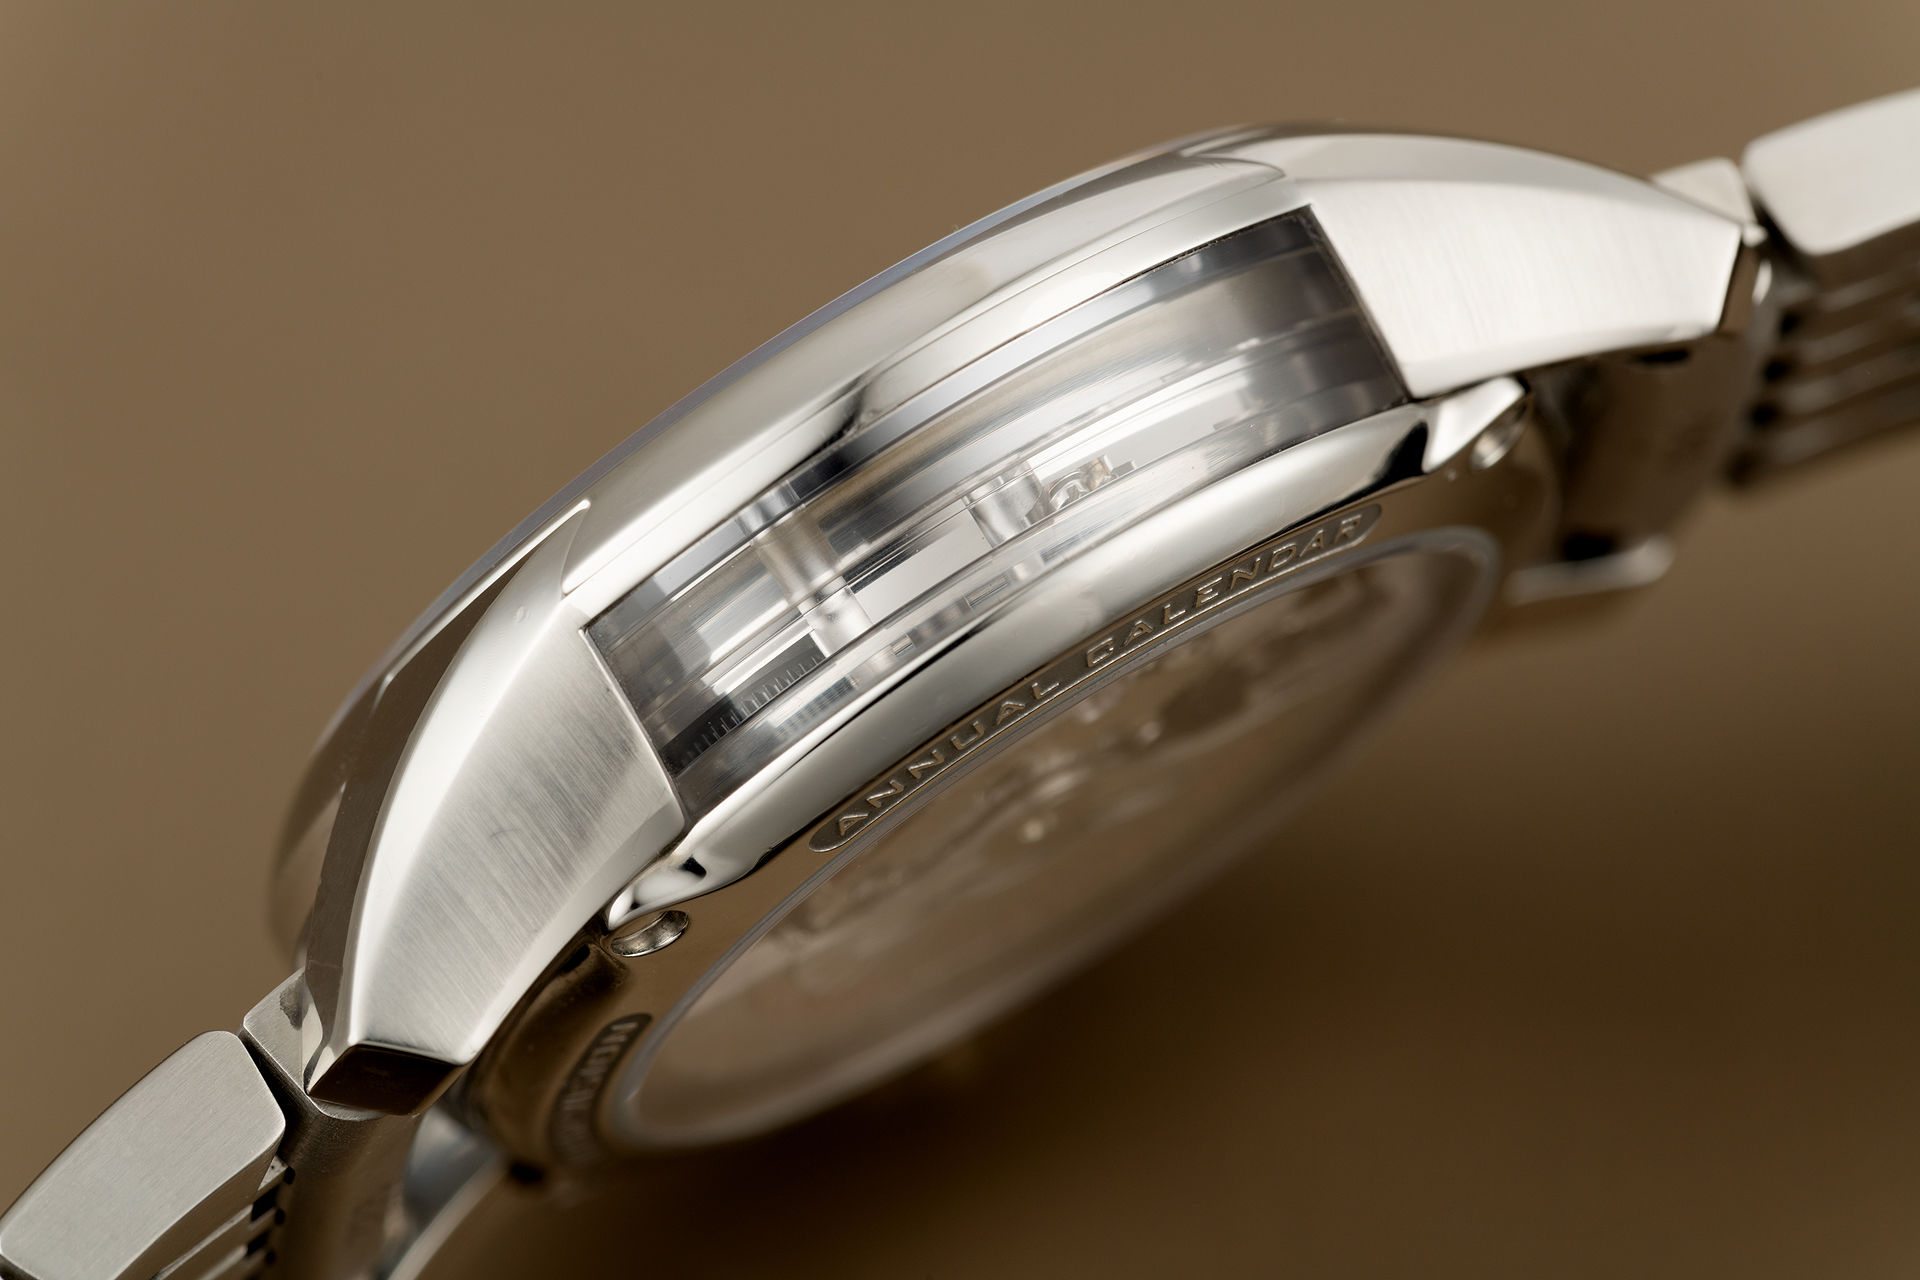 ref 431.30.41.22.02.001 | 'Sapphire Case' Stainless Steel | Omega Hour Vision